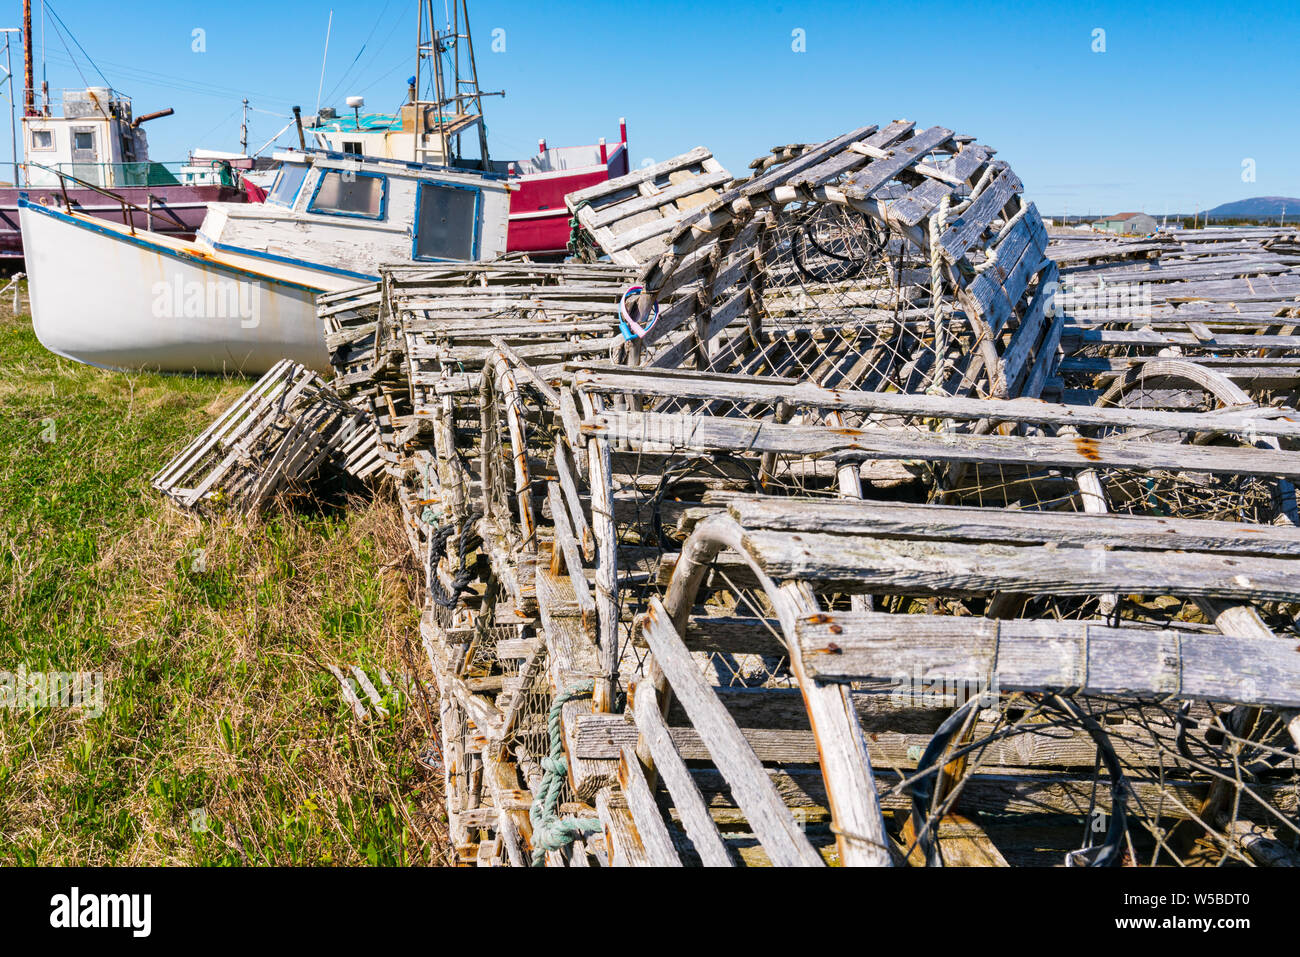 Old wooden lobster traps and fishing boats in Newfoundland, Canada Stock Photo